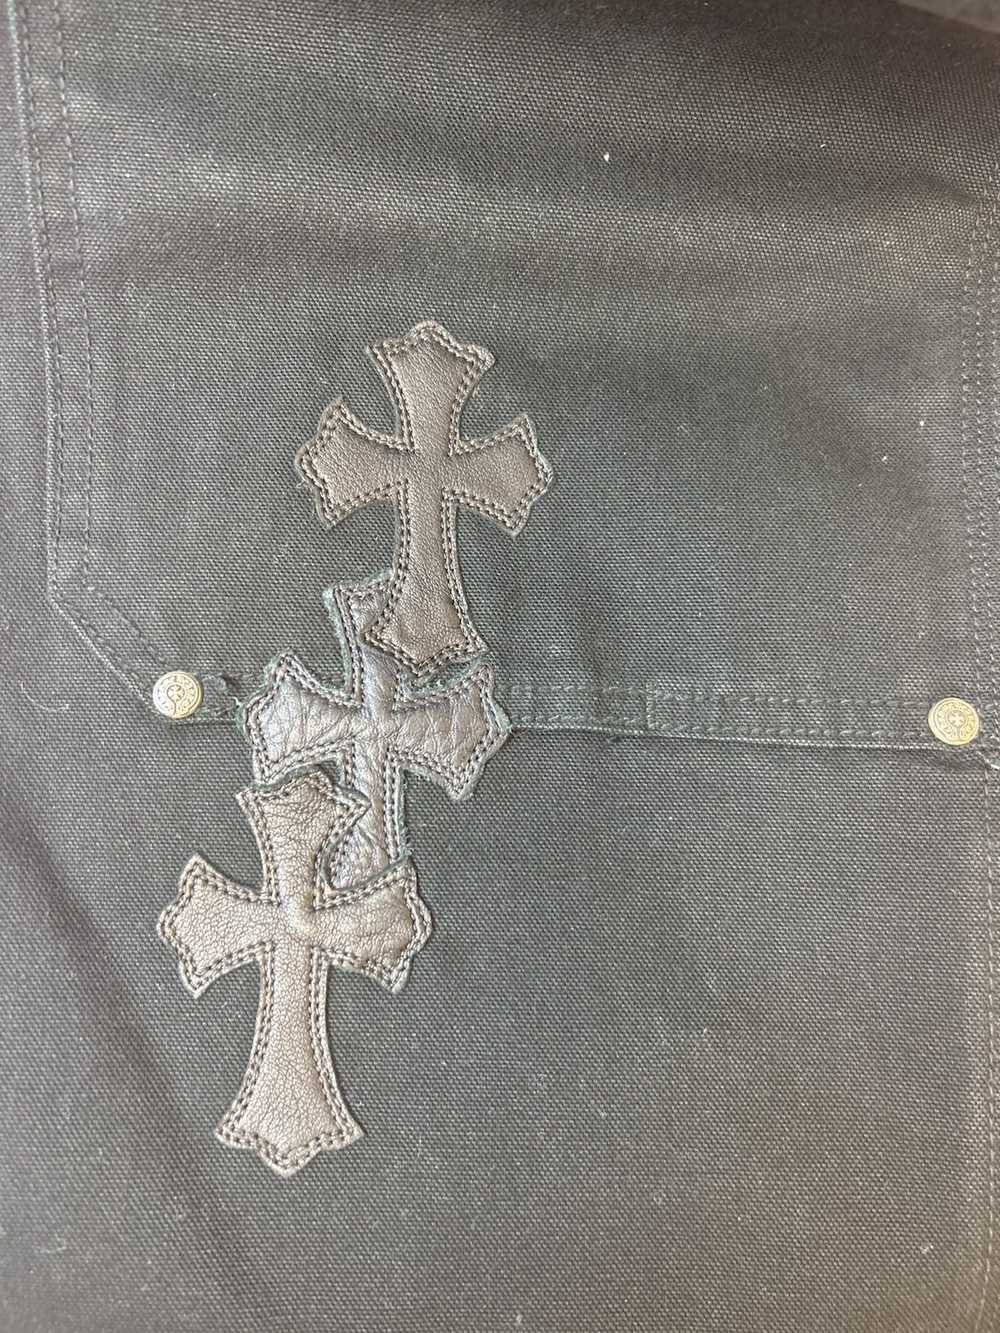 Chrome Hearts White & Blue Leather Cross Patches Jeans – SHENGLI